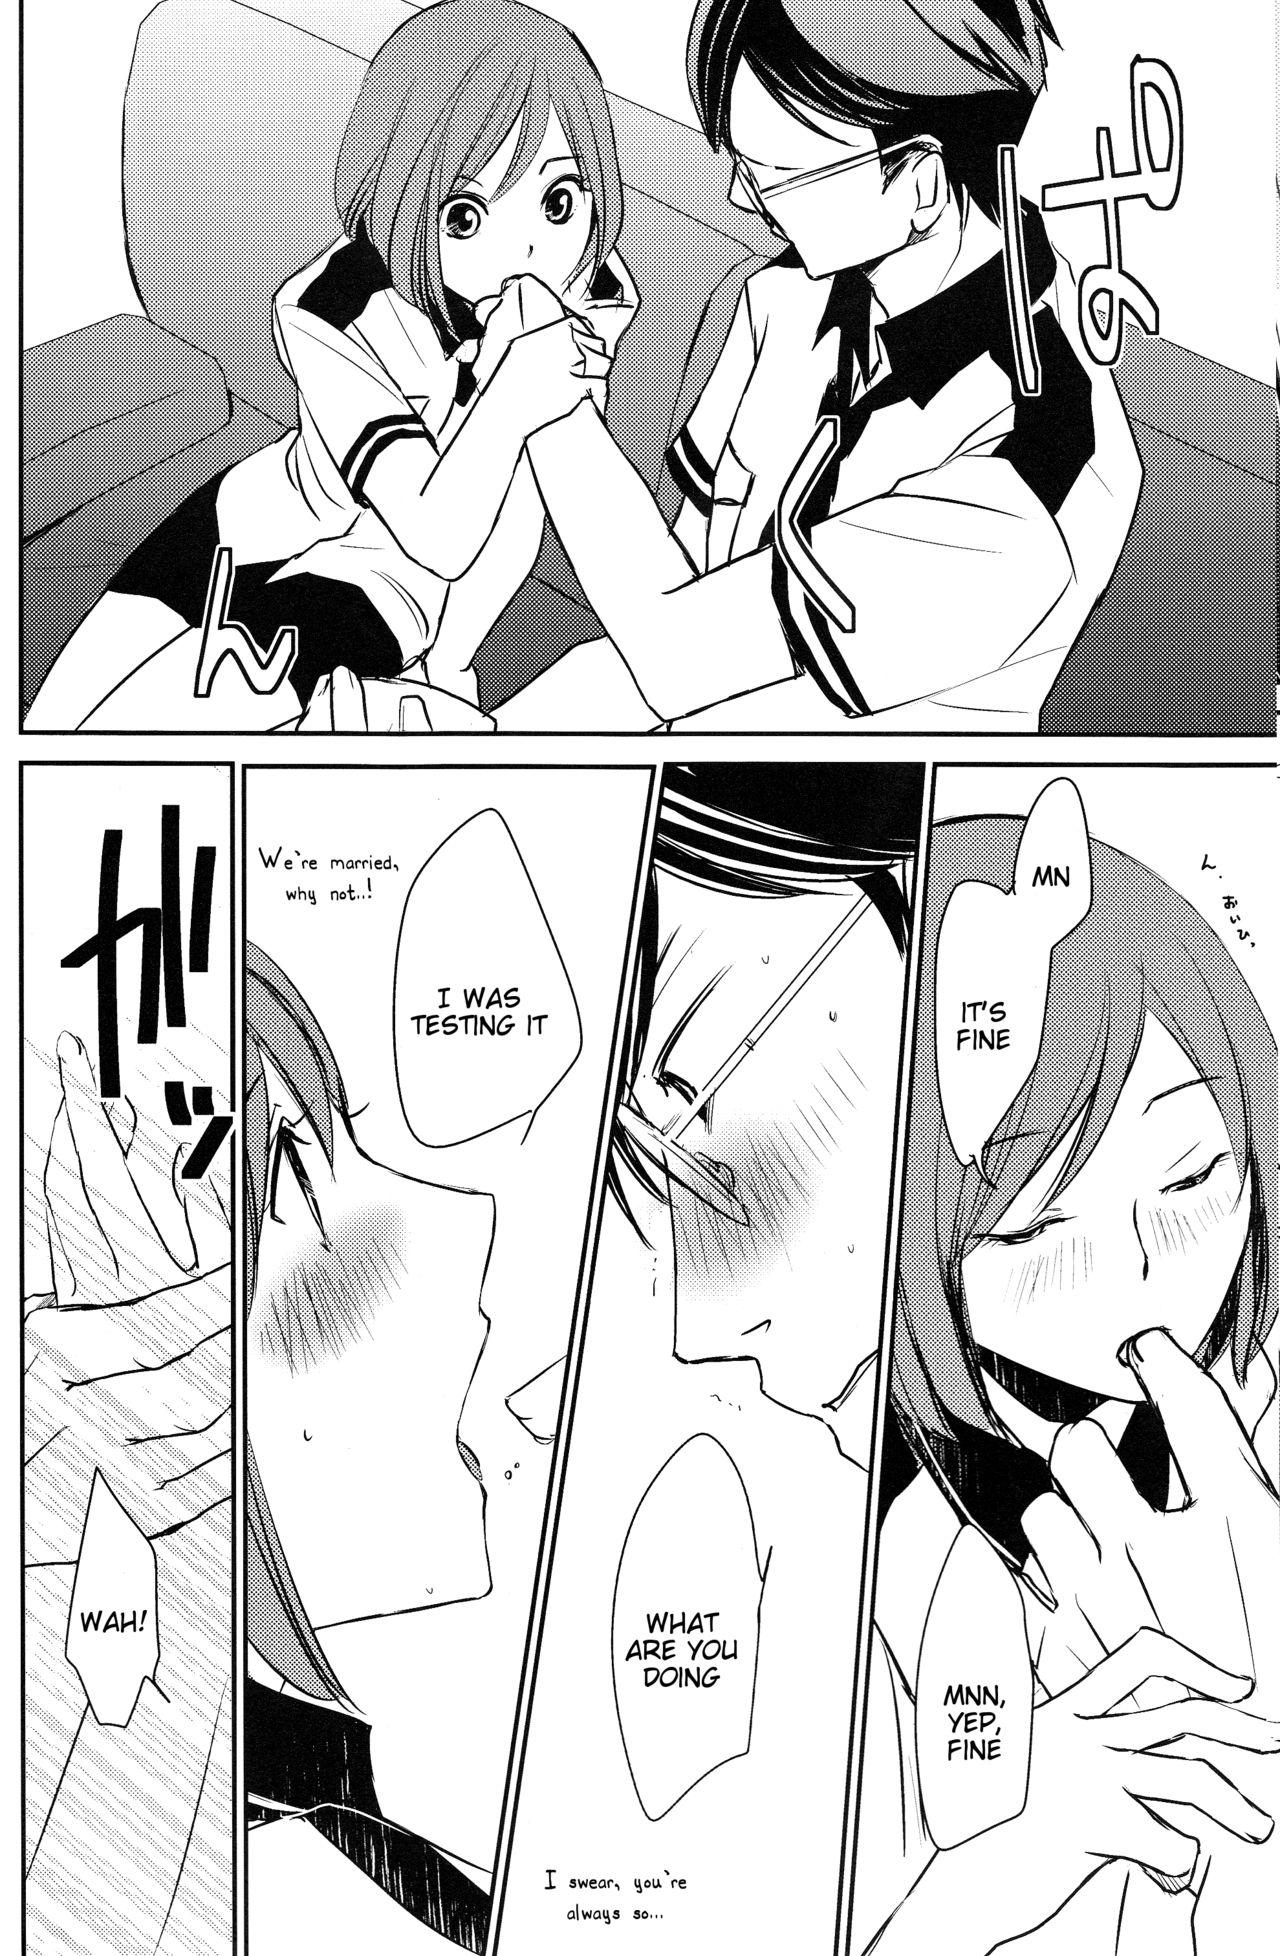 Reversecowgirl darling darling darling - Scared rider xechs Stretching - Page 5